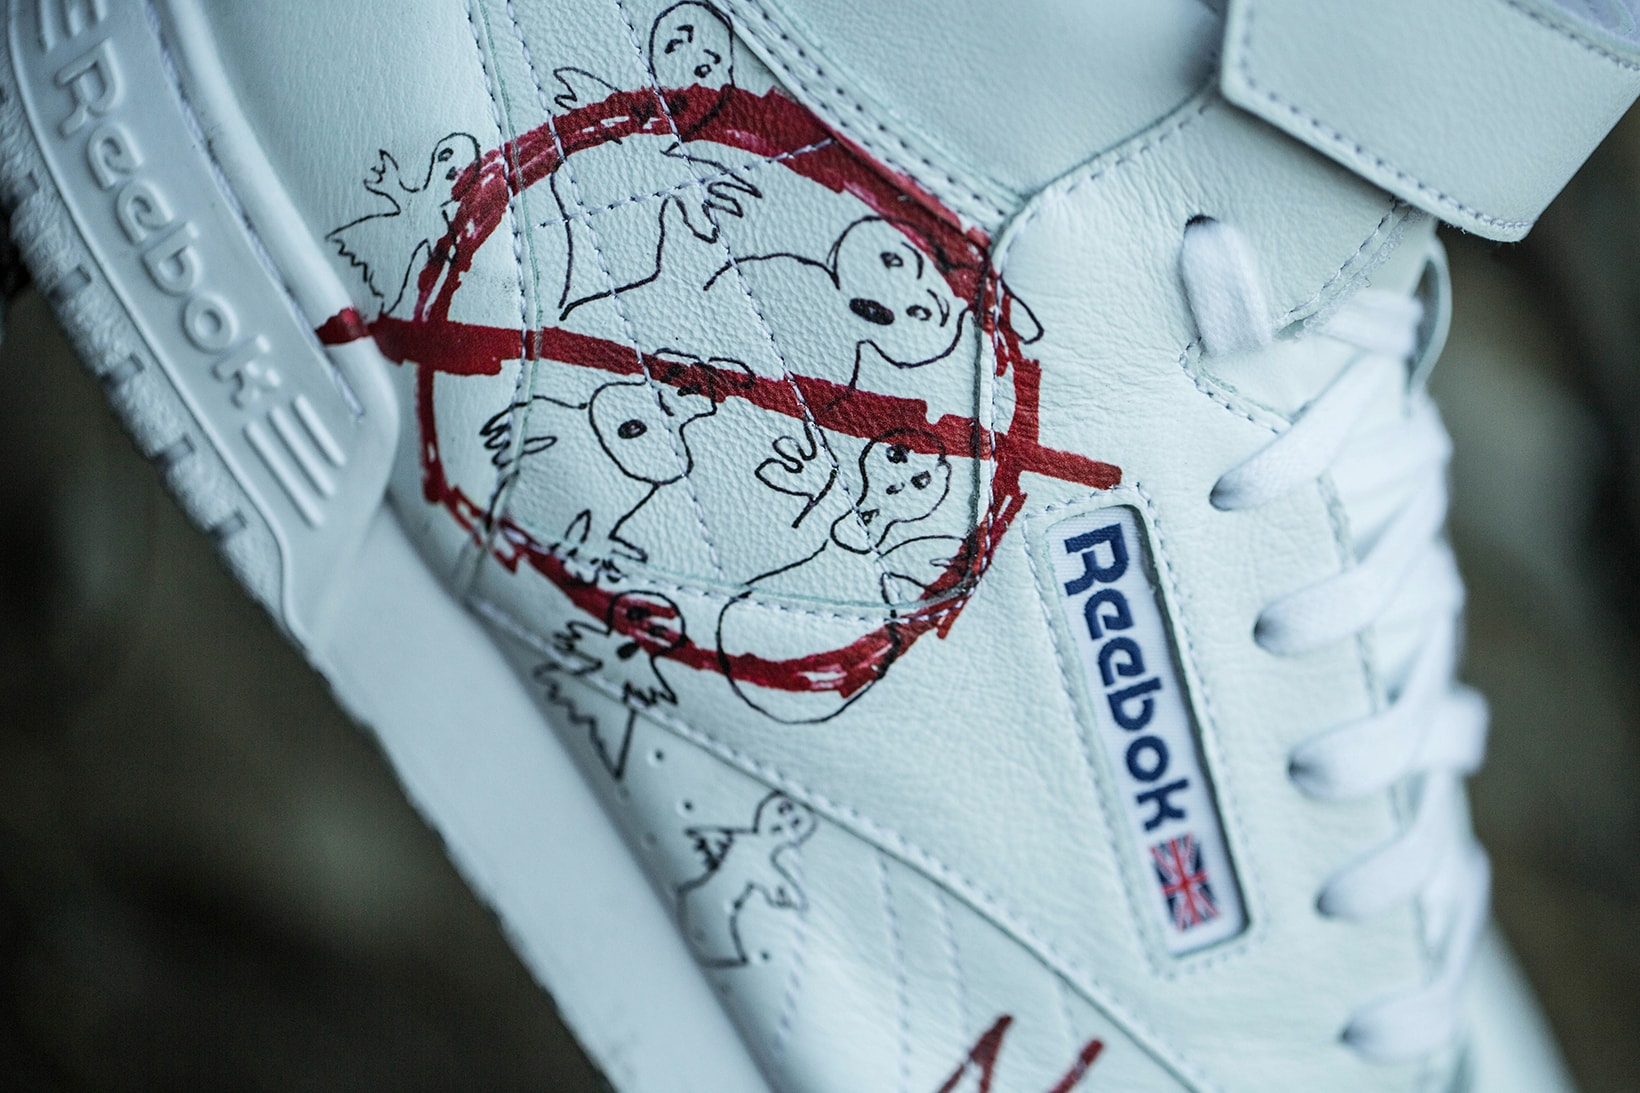 BAIT Stranger Things Ghostbusters Reebok Ex O Fit Hi Collaboration Sneaker Release Date Info Drops October 27 2017 Los Angeles Exclusive Look